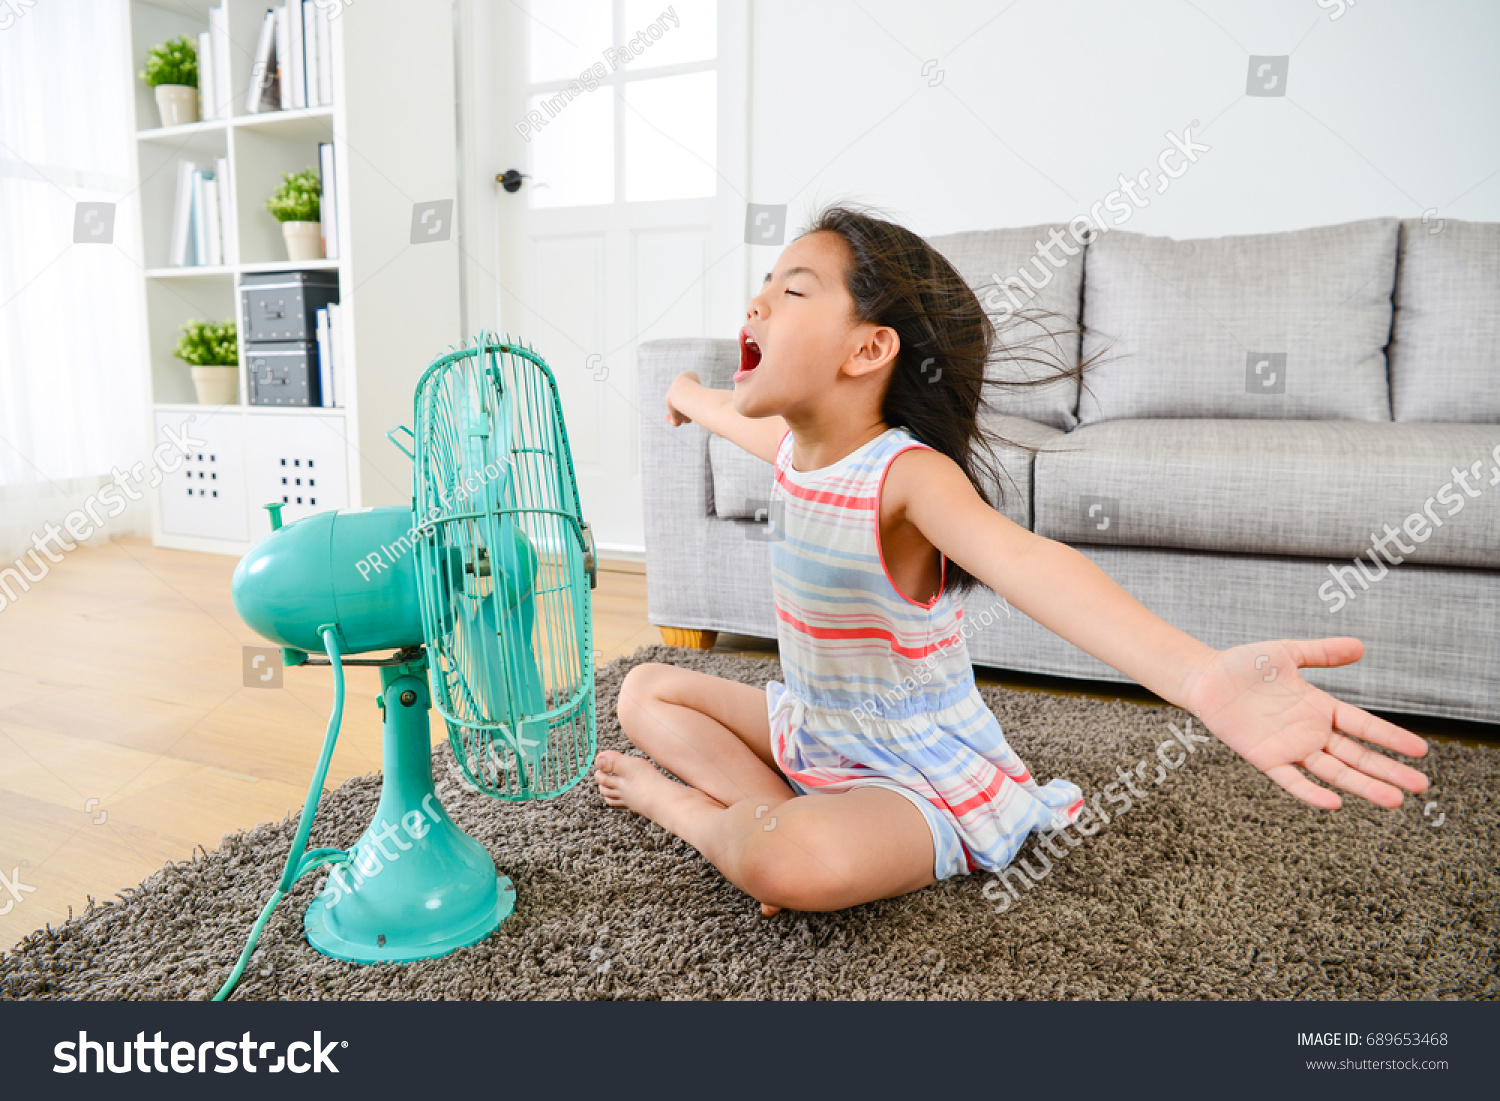 cheerful beauty girl kid opening arms singing enjoying cool wind when she sitting on living room floor blowing electric fan. #689653468